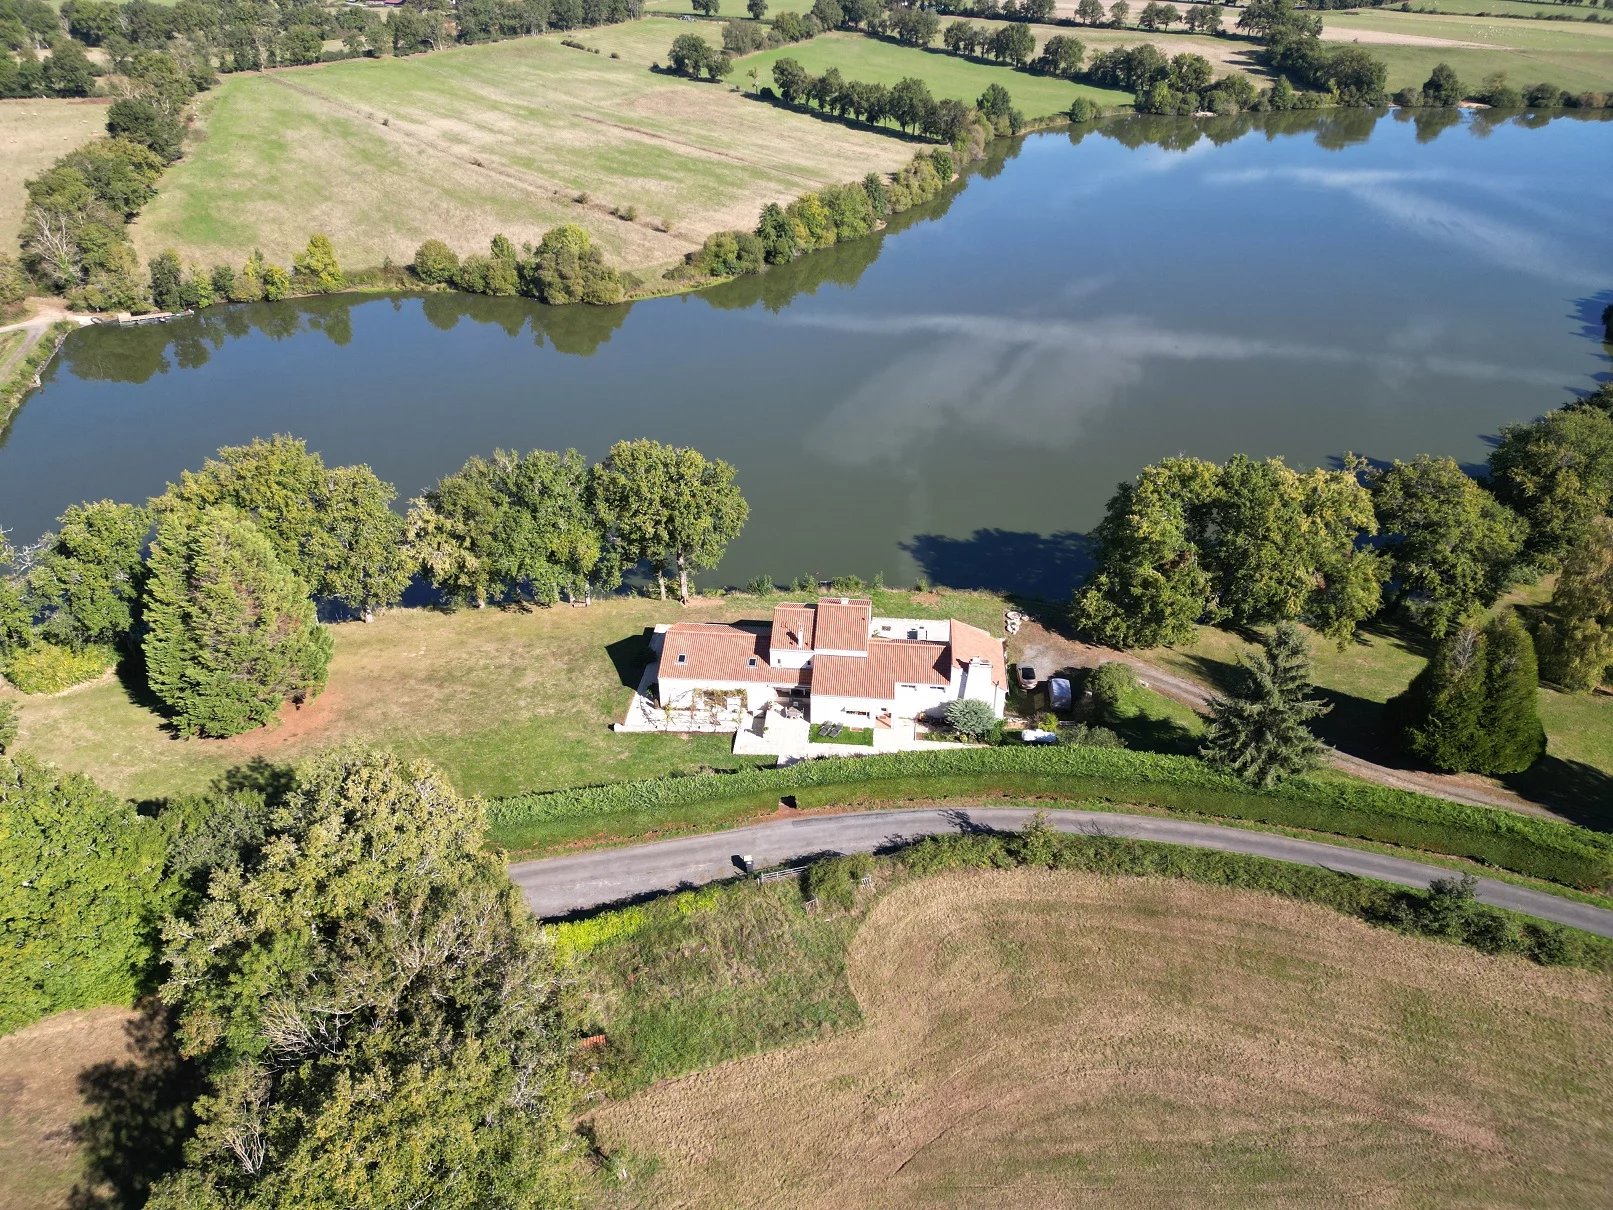 Property in France with lake for sale